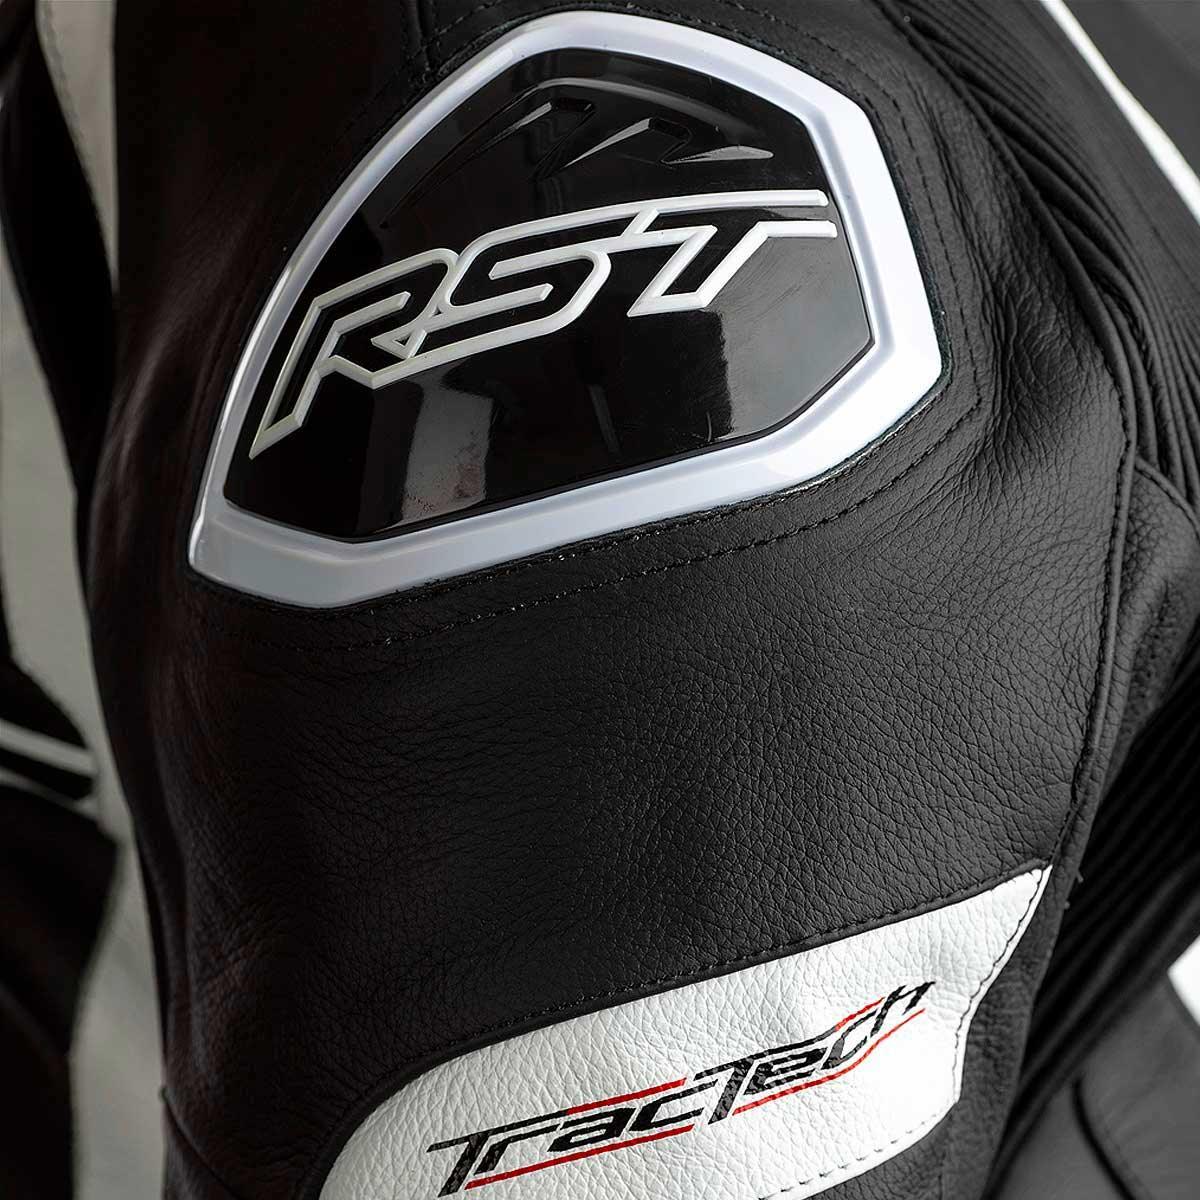 RST TracTech Evo 4 Leather Jacket CE Black White - Motorcycle Leathers